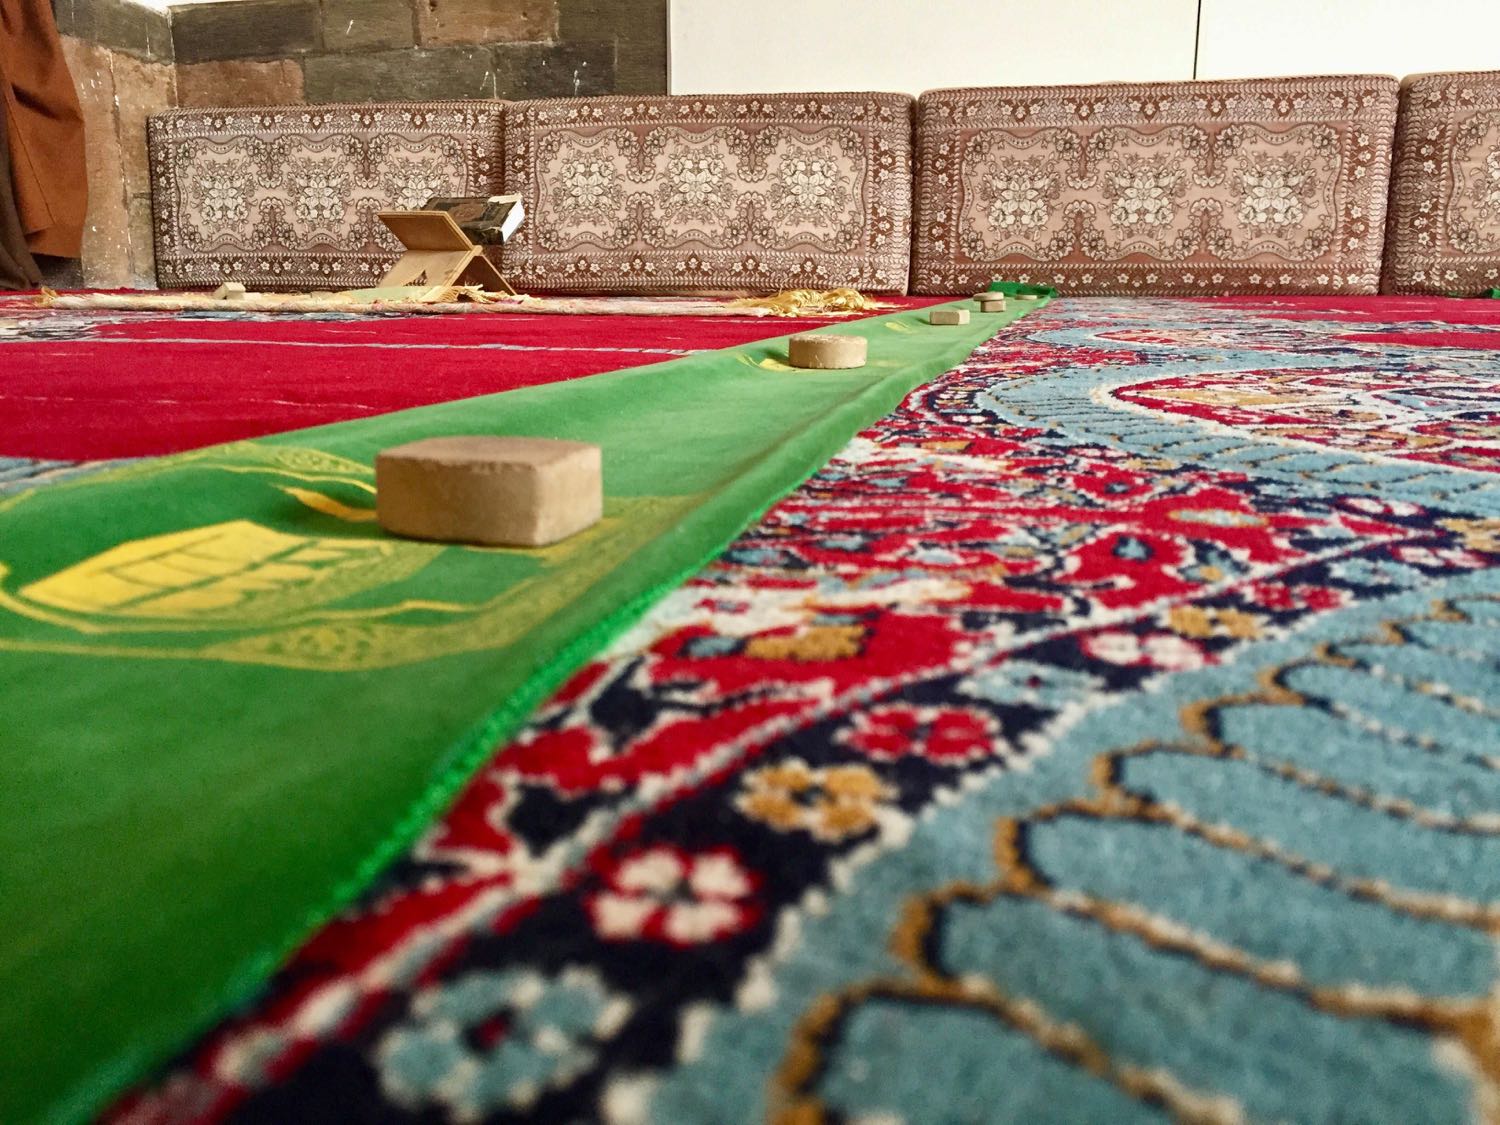 Detail view of the carpets on the floor of the main Prayer Hall.